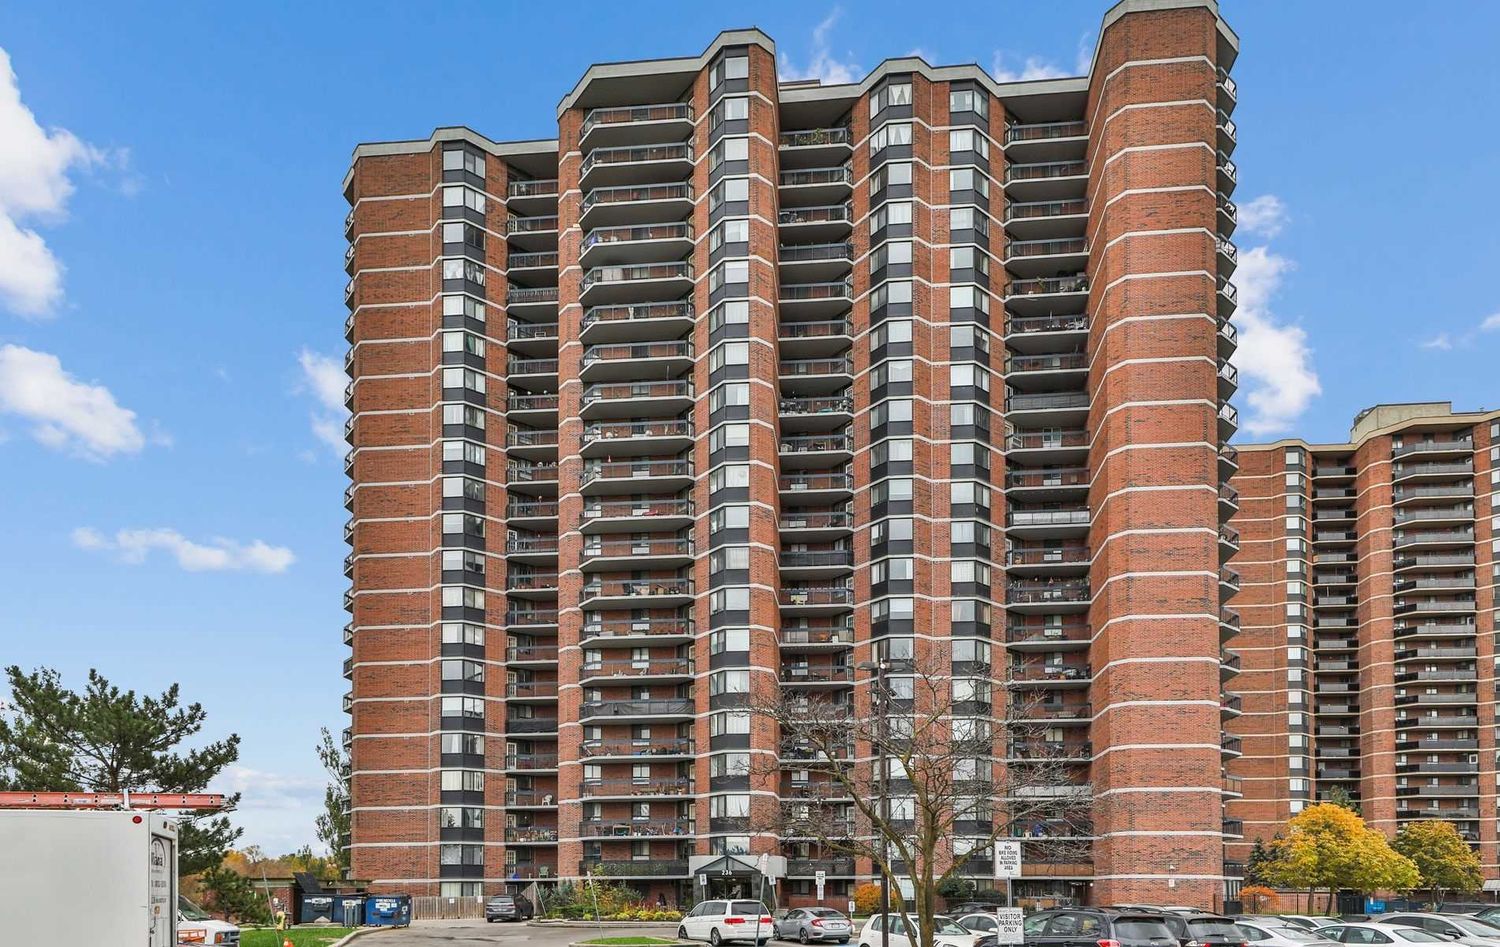 236 Albion Road. 236 Albion Road Condos is located in  Etobicoke, Toronto - image #1 of 3